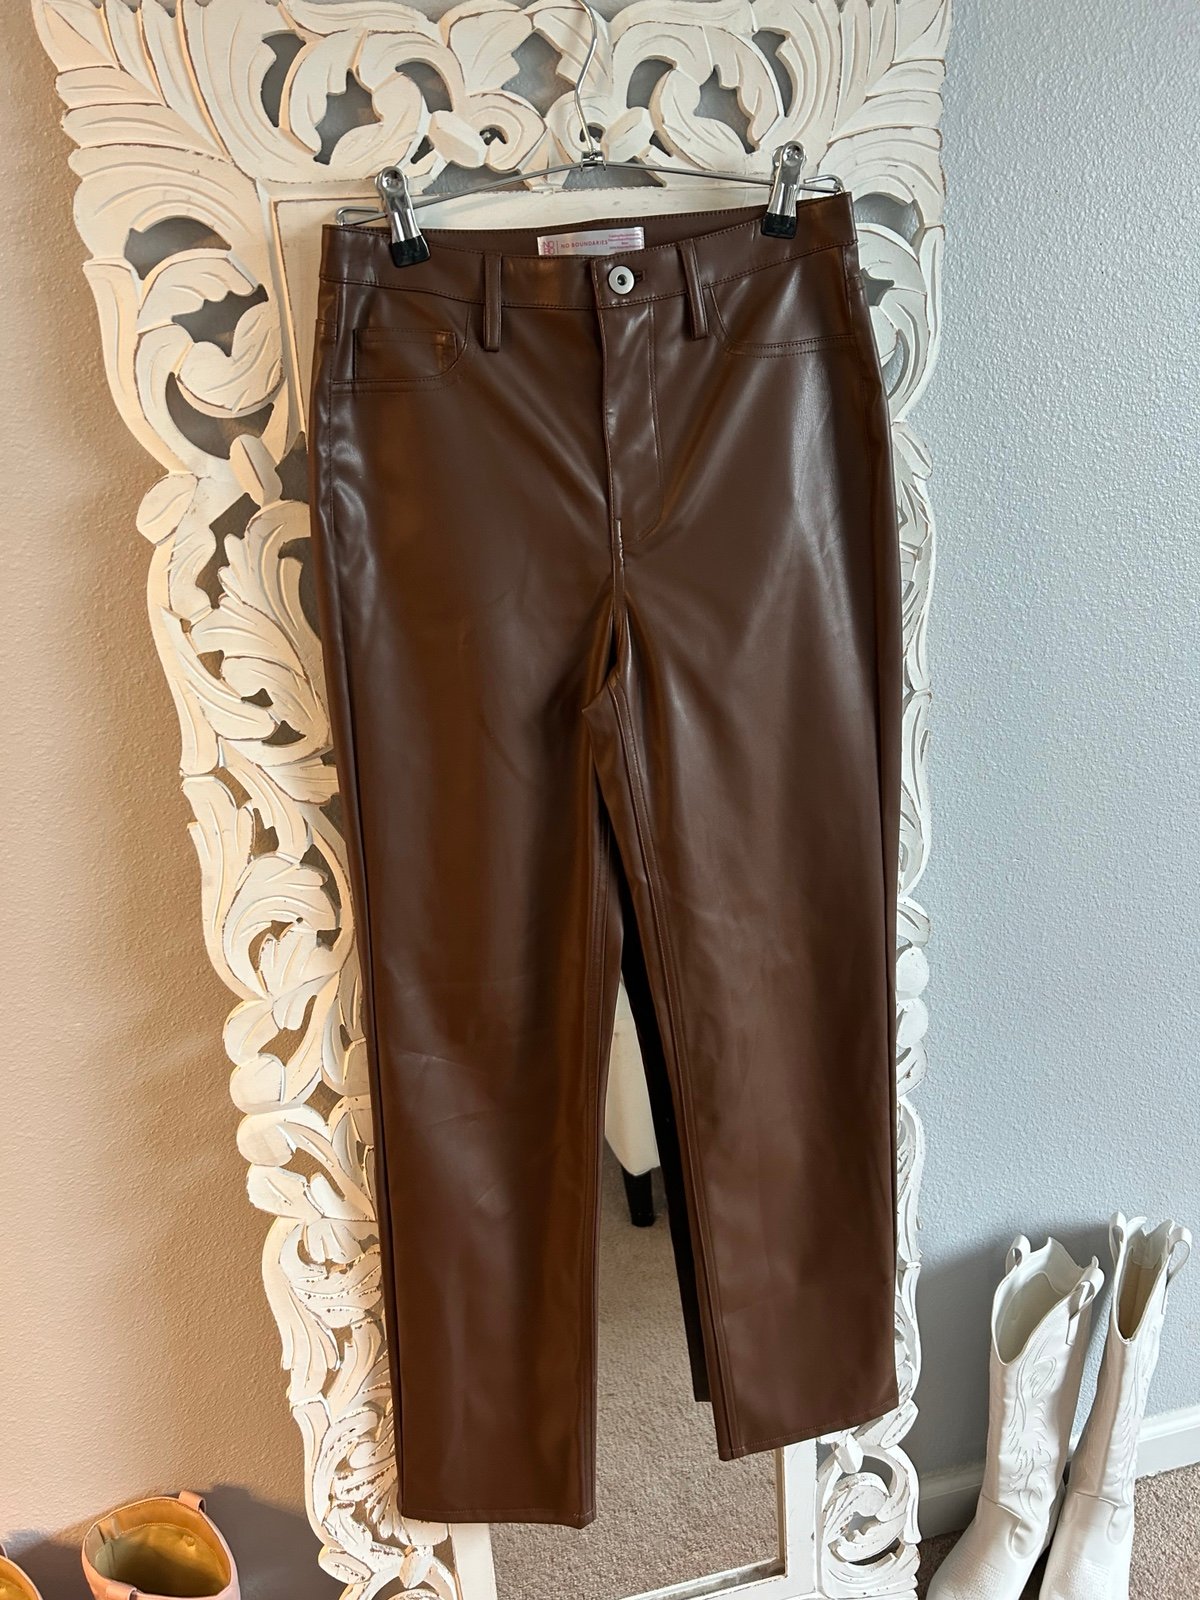 reasonable price Women’s leather pants gGv1RP2da US Outlet